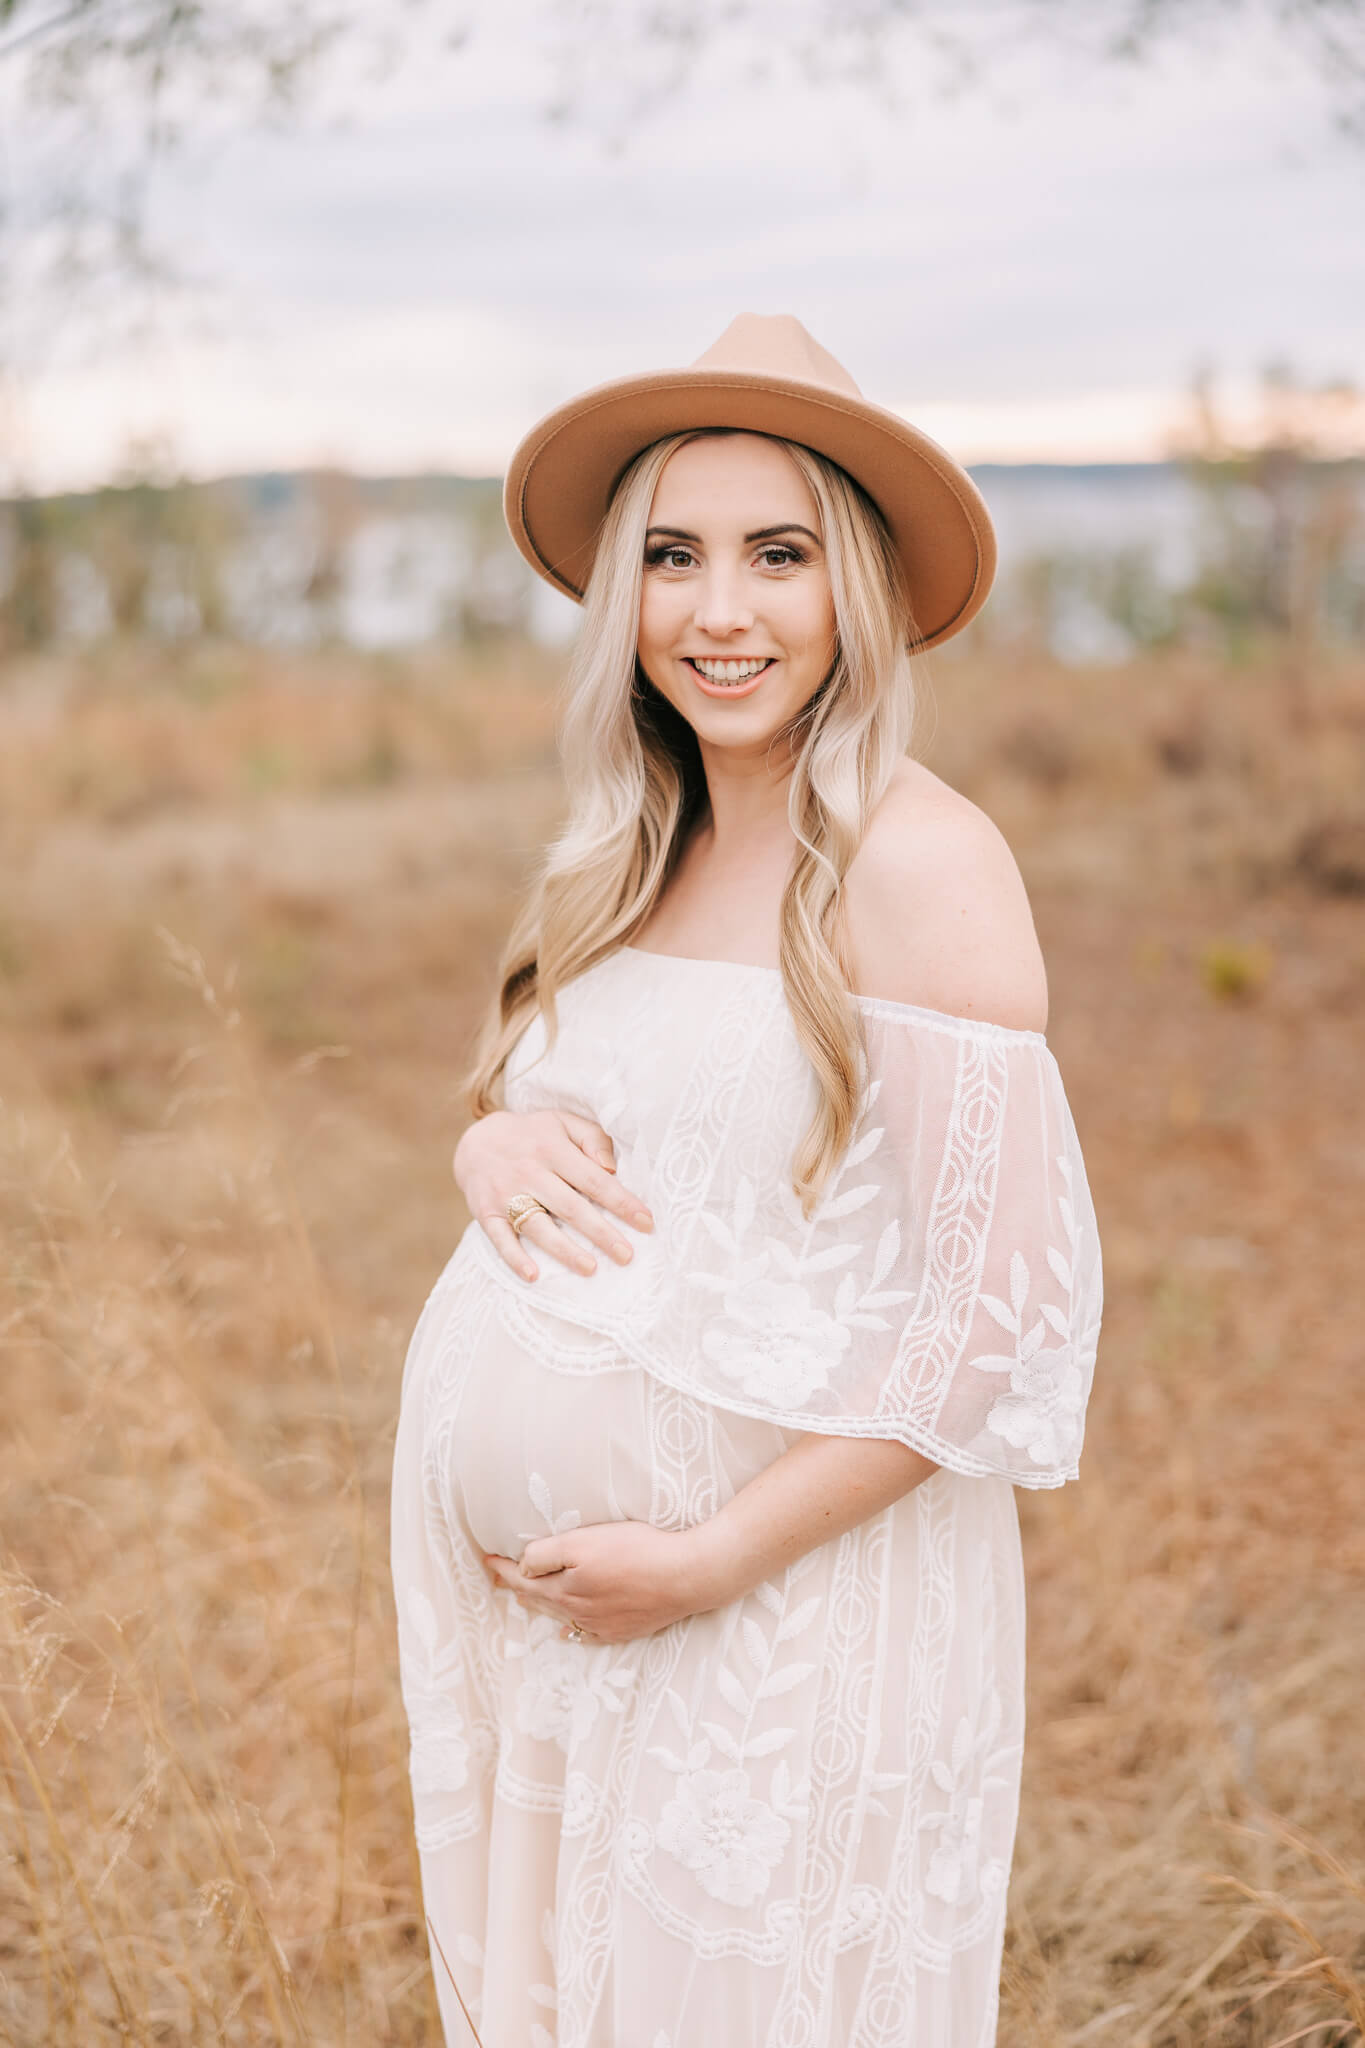 Pregnant mom capturing her maternity portraits with molly berry photography.